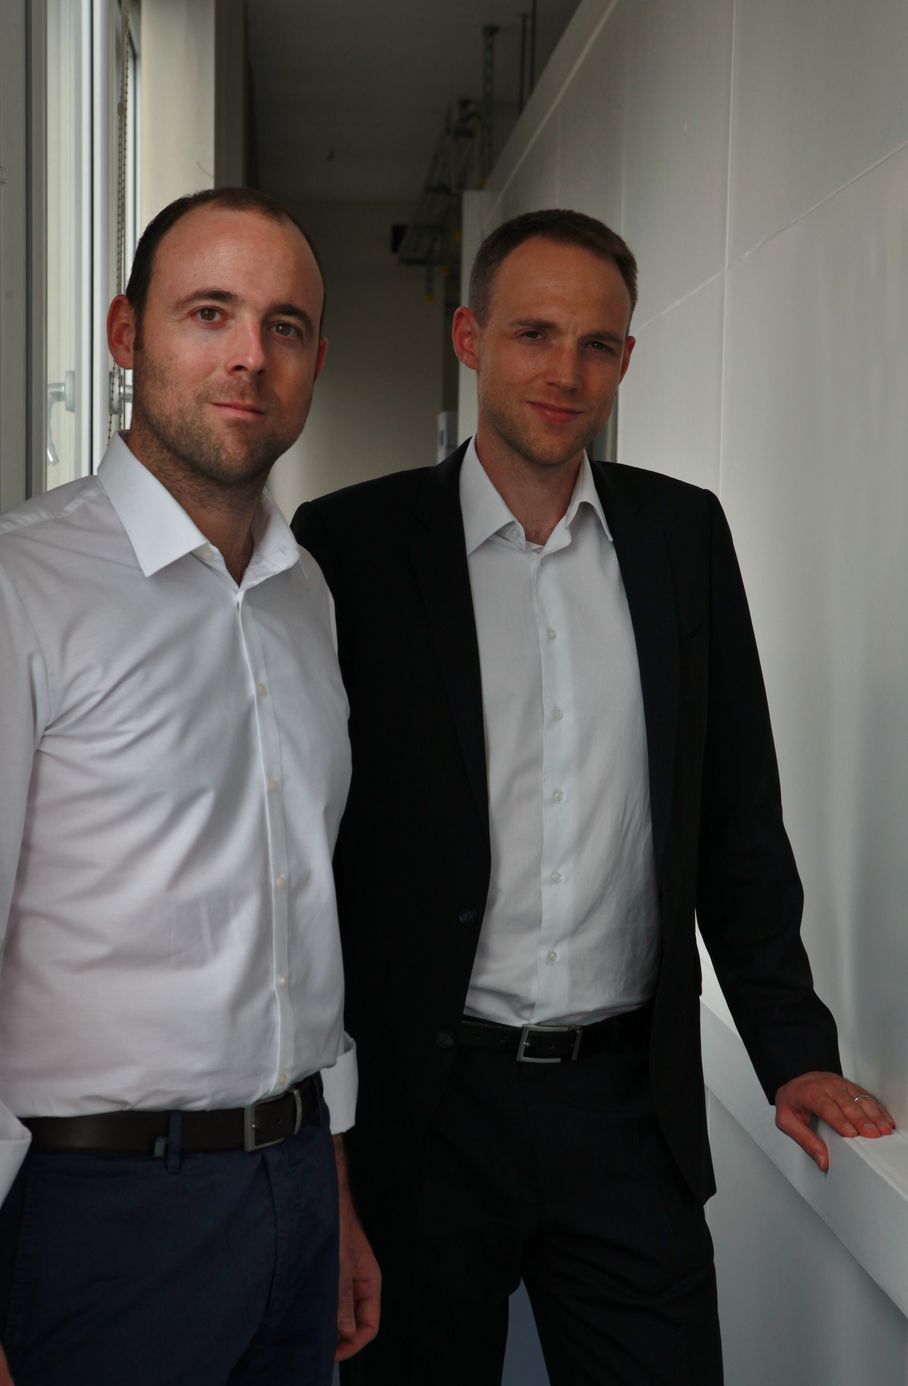 (From left): Dr Nicolas Gehrig, executive vice-chairman, and Yann Gehrig, executive director